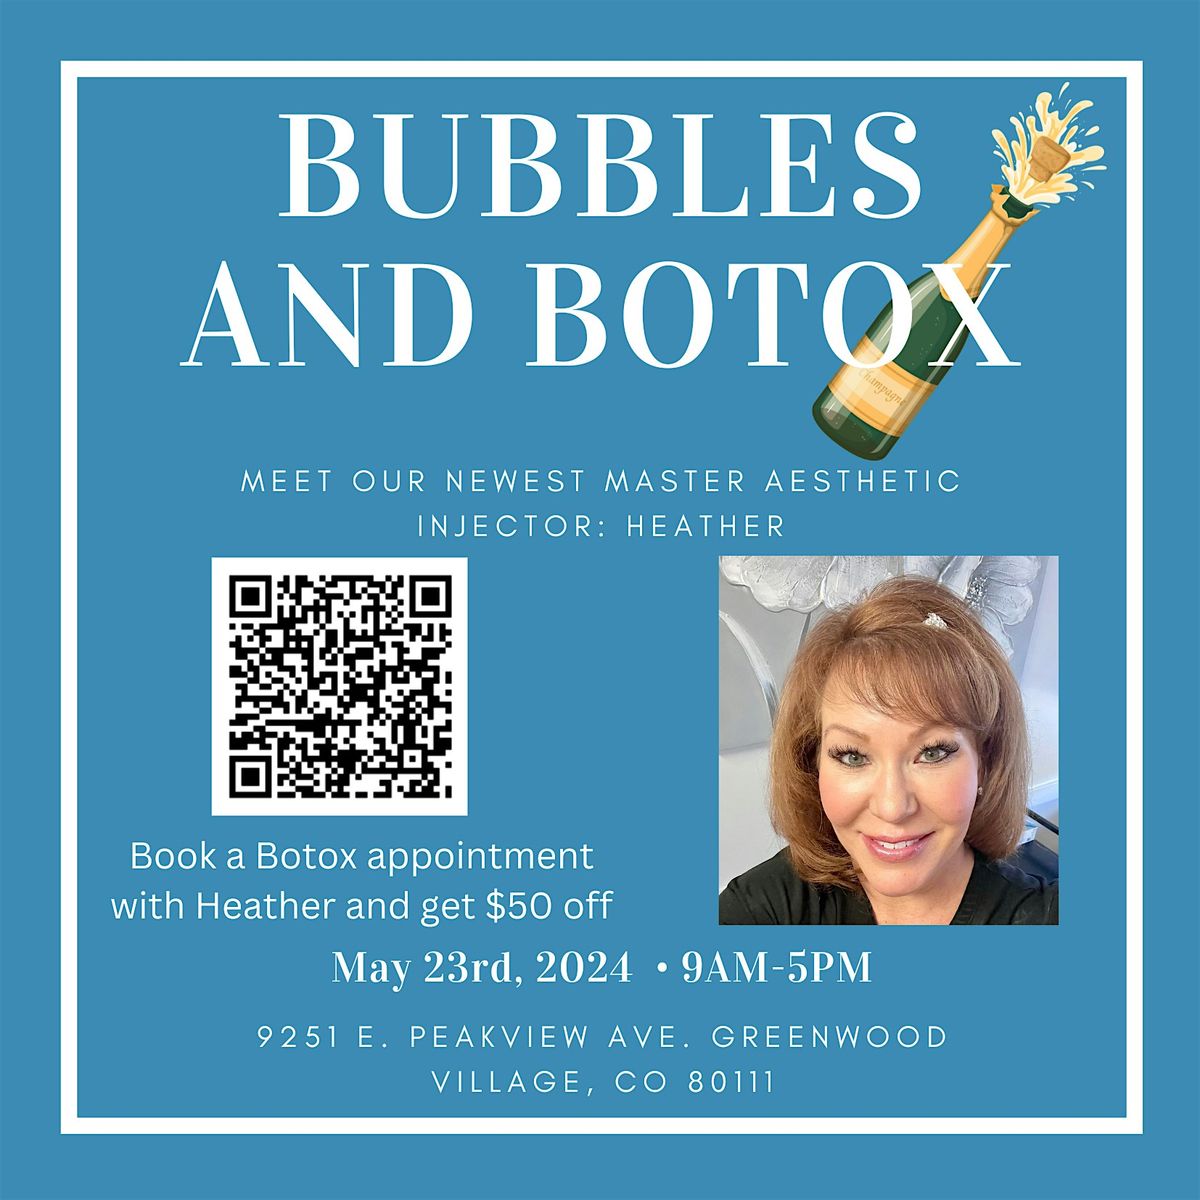 Bubbles and Botox